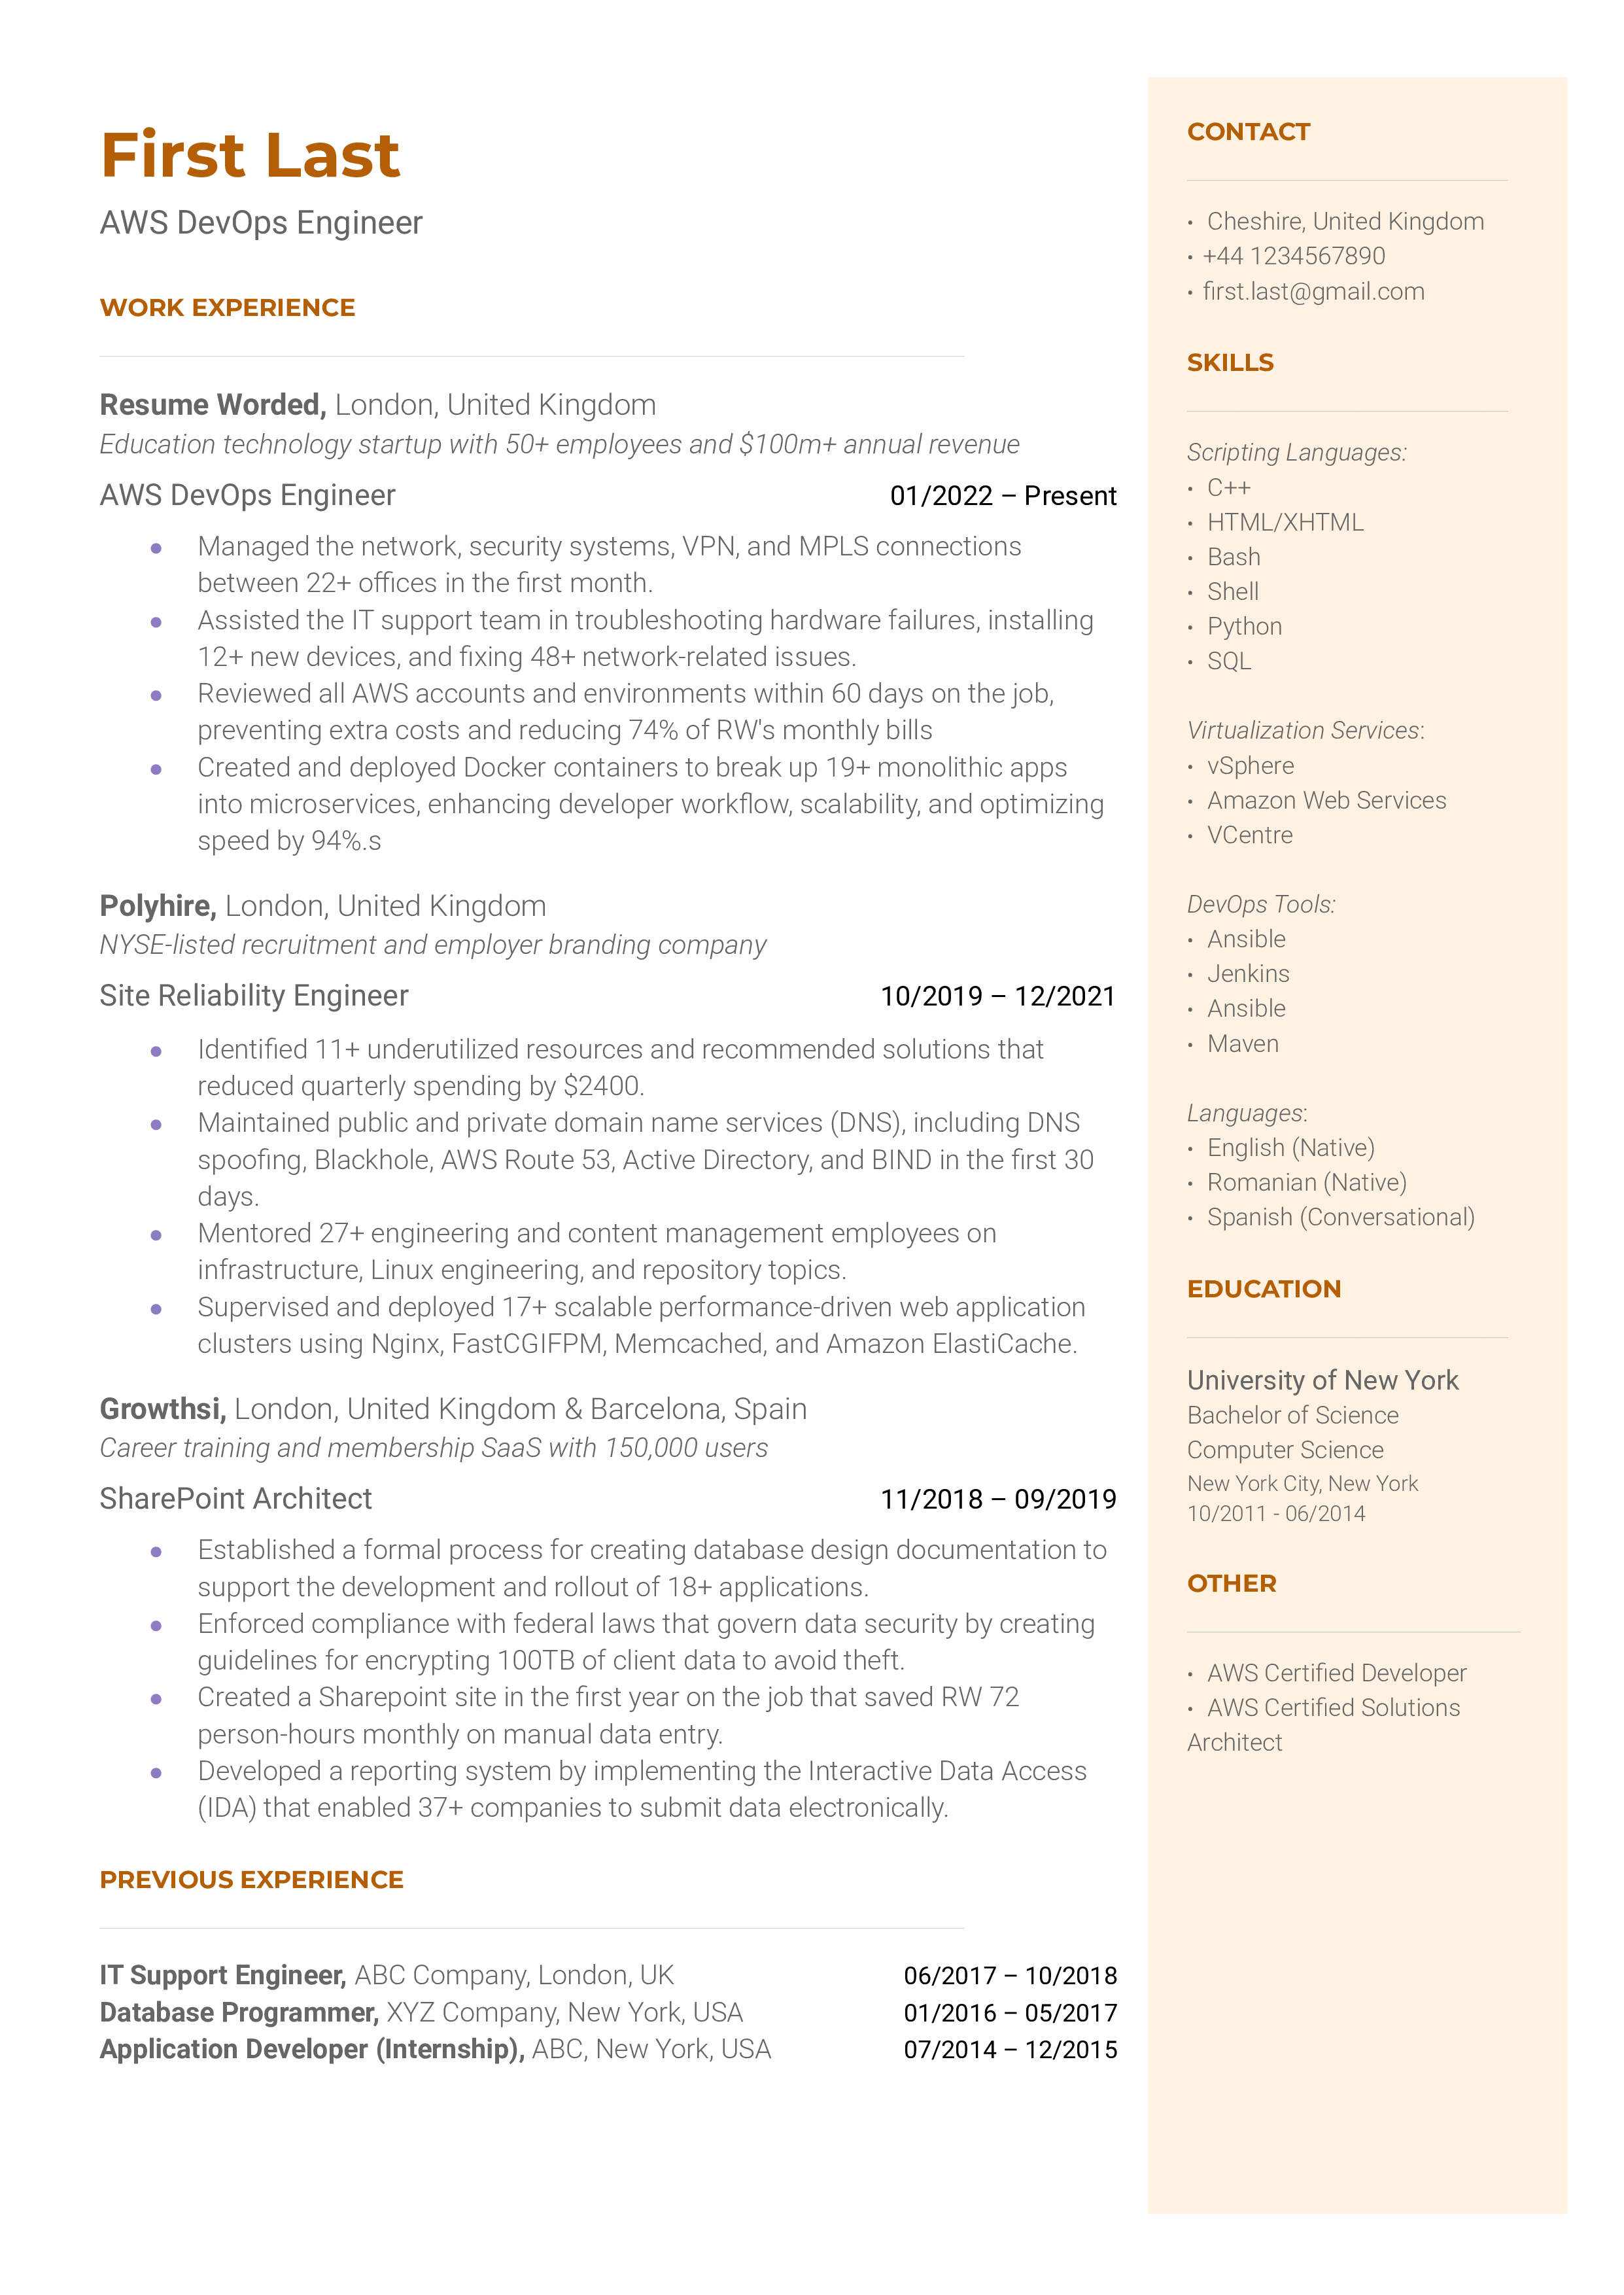 A clean, well-organized CV showcasing AWS certifications and tool experience.